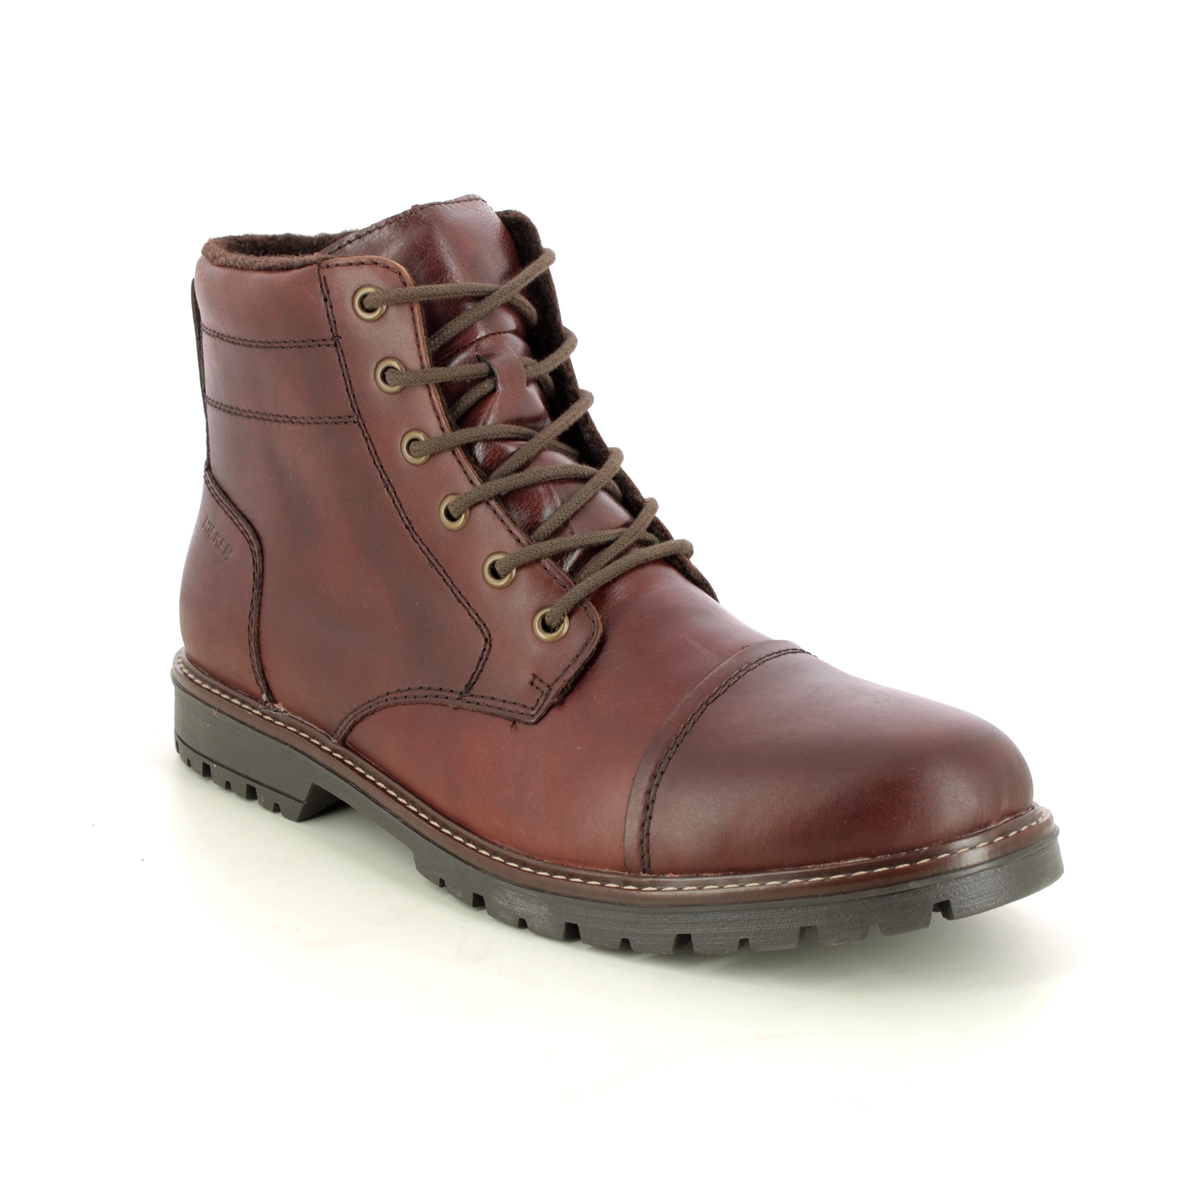 Rieker F3604-25 Brown leather Mens Winter Boots in a Plain Leather in Size 44